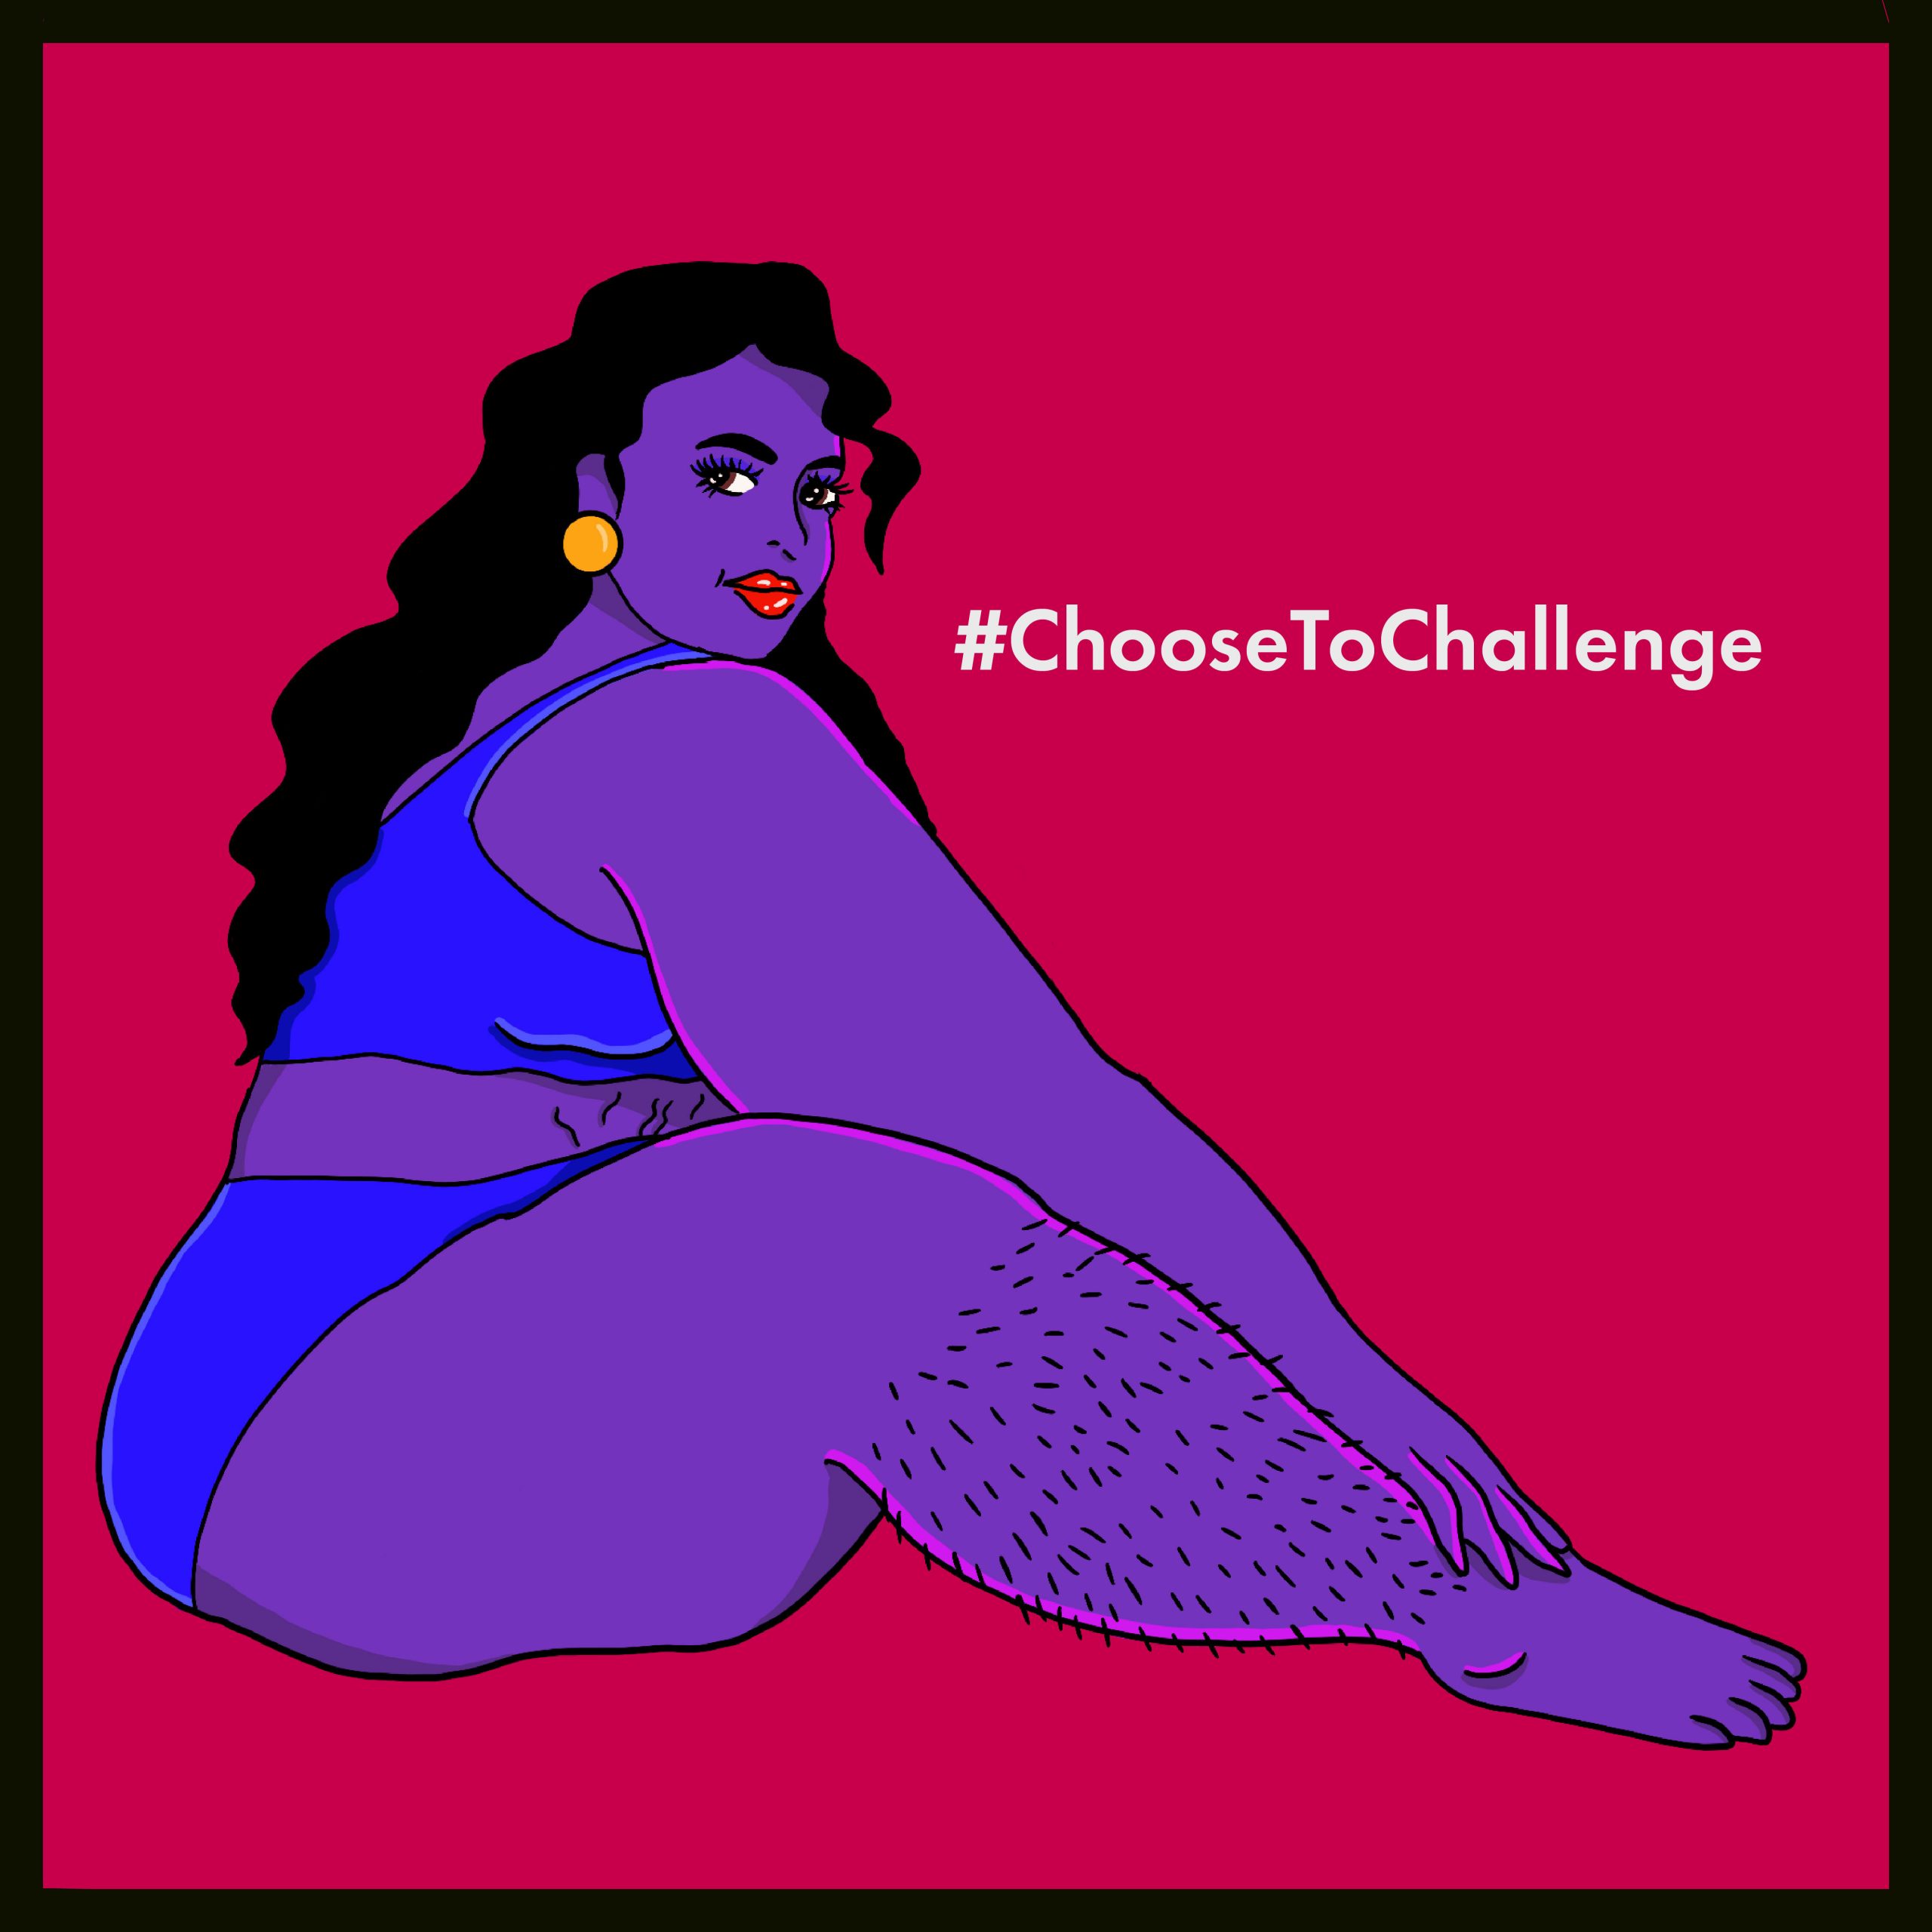 Illustration of a woman sitting proudly in underwear, showing leg hair, a large body, and stretch marks on her stomach. Text reads #ChooseToChallenge.